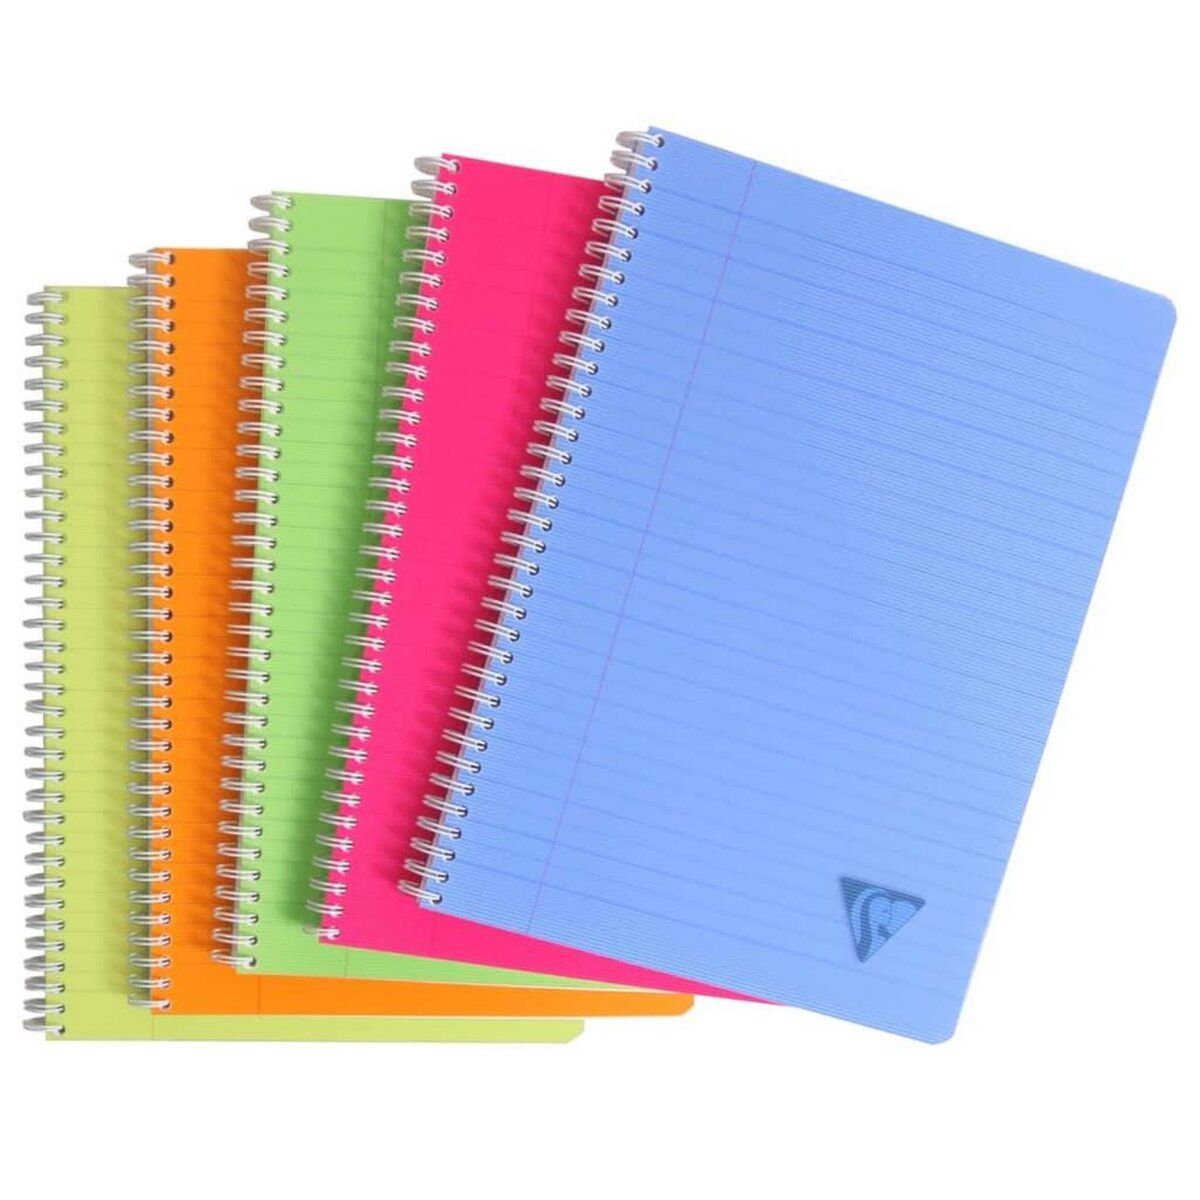 CLAIREFONTAINE Clairefontaine Cahiers a reliure spiralee 90 Feuilles a reglure 5 pcs